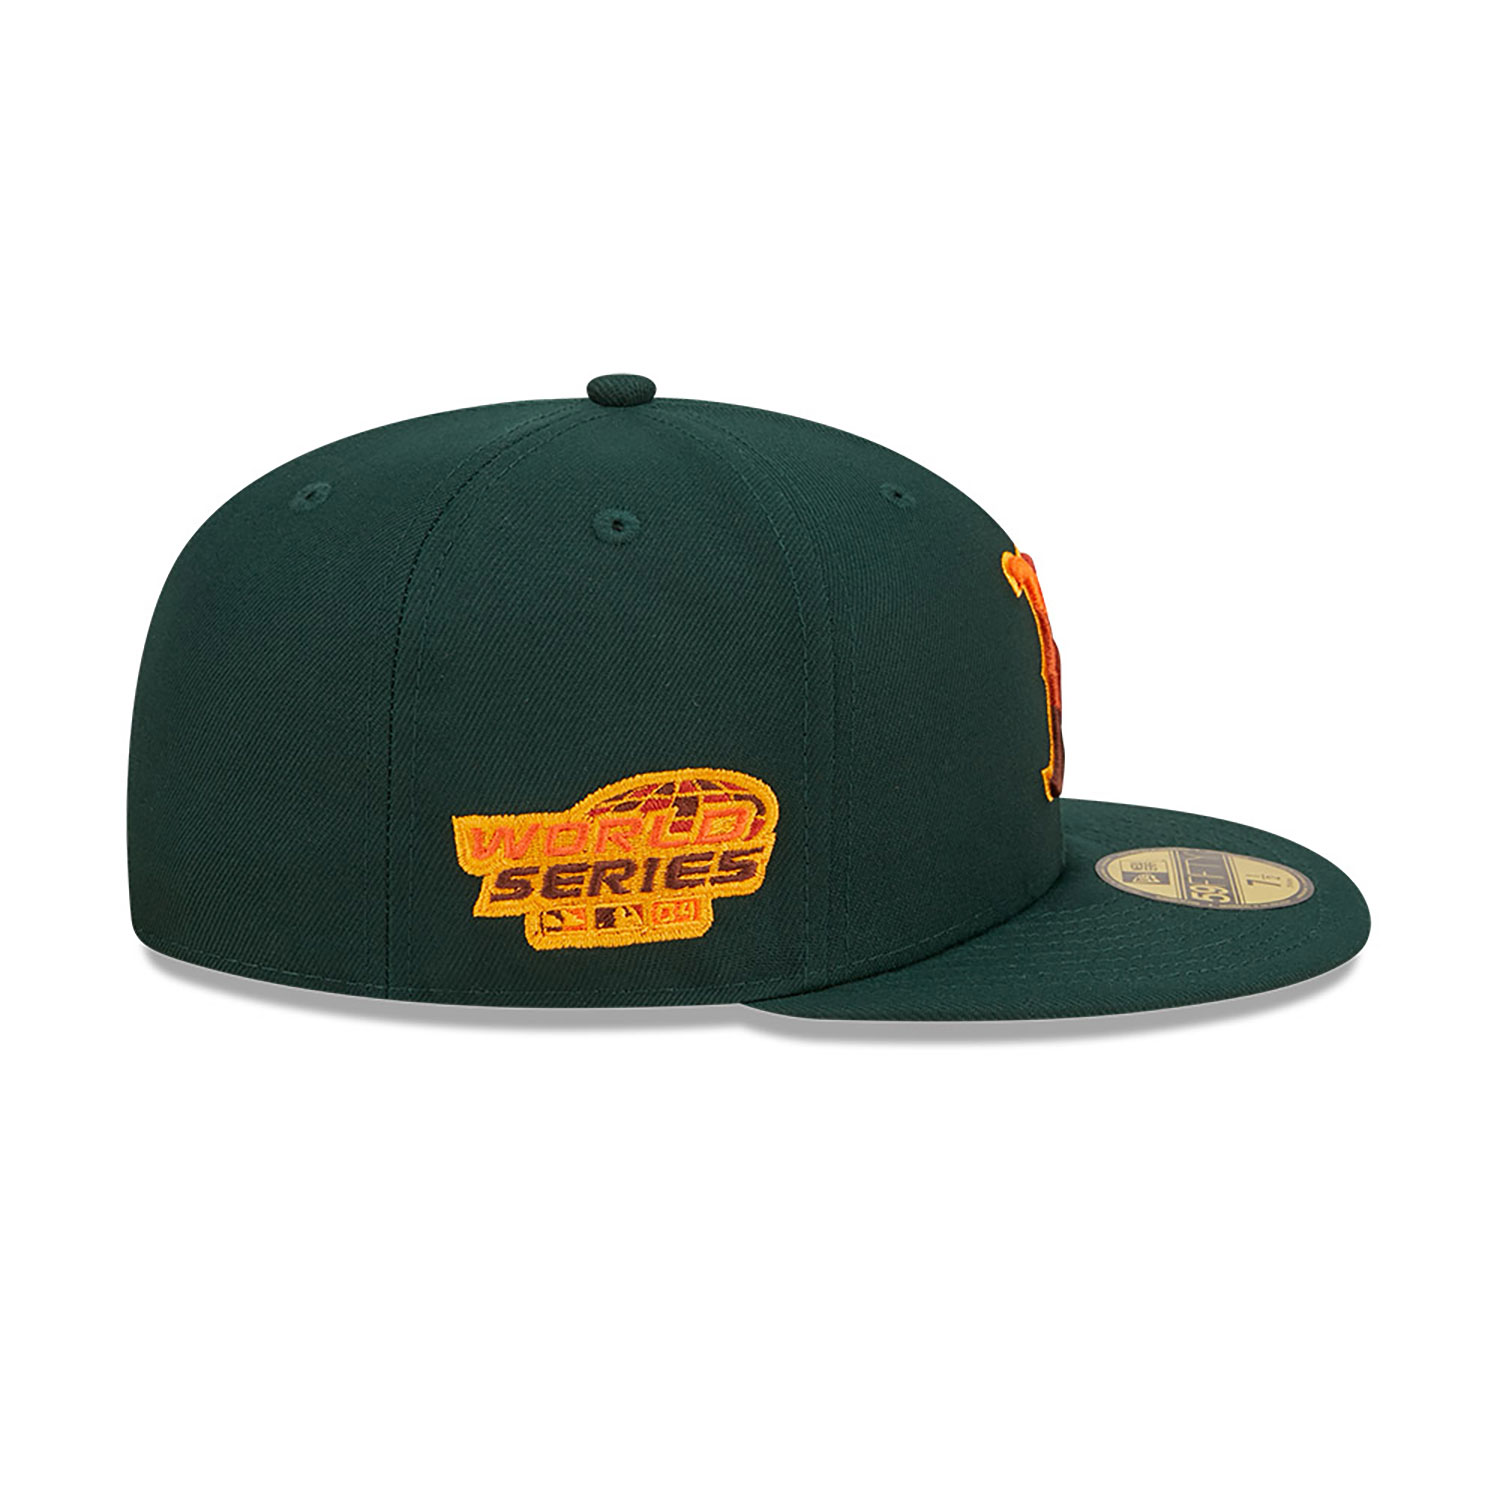 Cappellino 59FIFTY Fitted Boston Red Sox Leafy Verde scuro